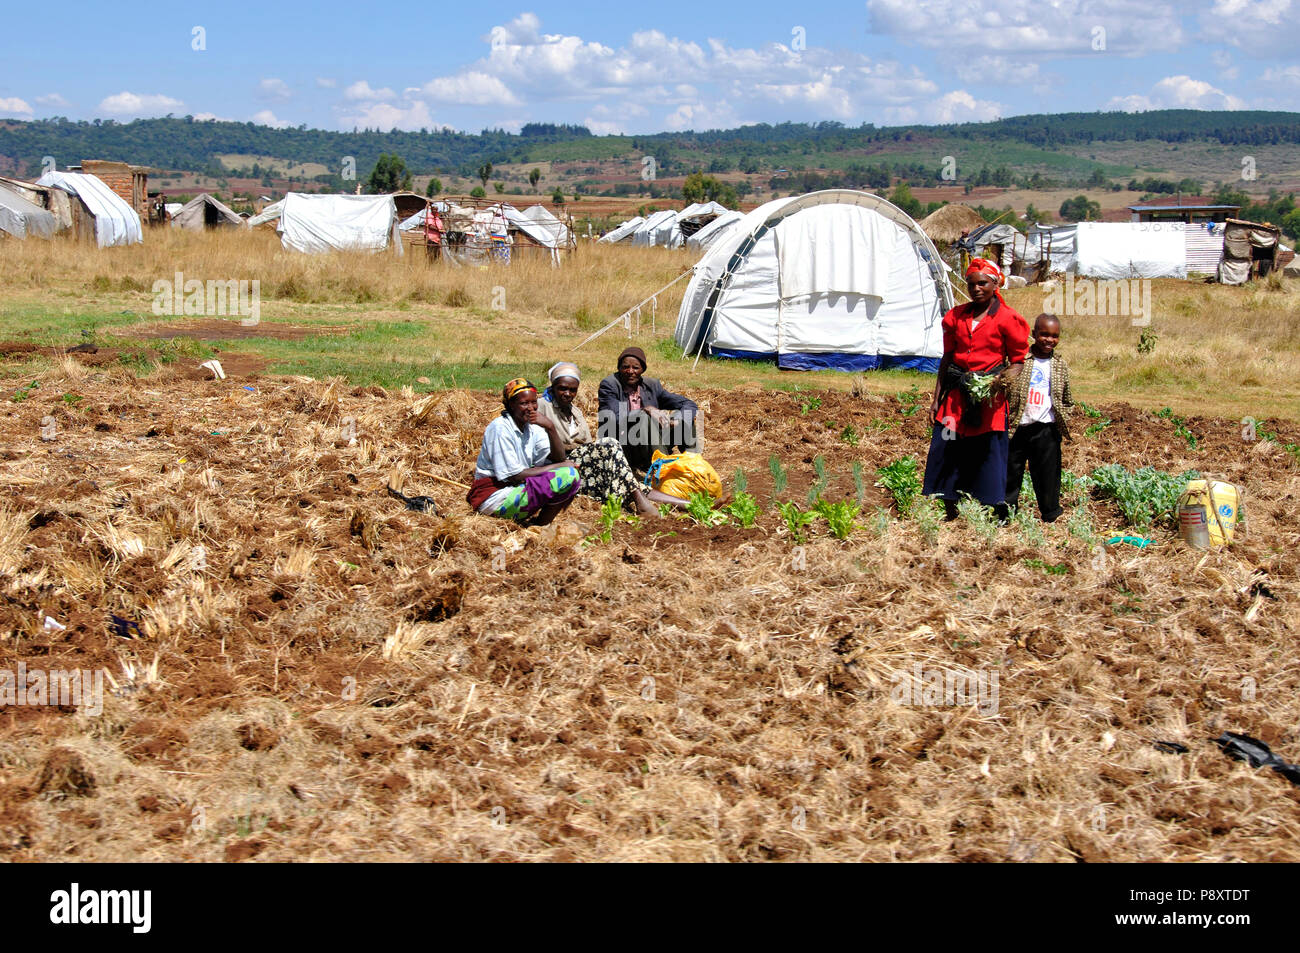 Kenya Red Cross Refugie Camp In Eldoret Rift Valley Where More Than 100 000 People Are Still Living In Weak Conditions Stock Photo Alamy